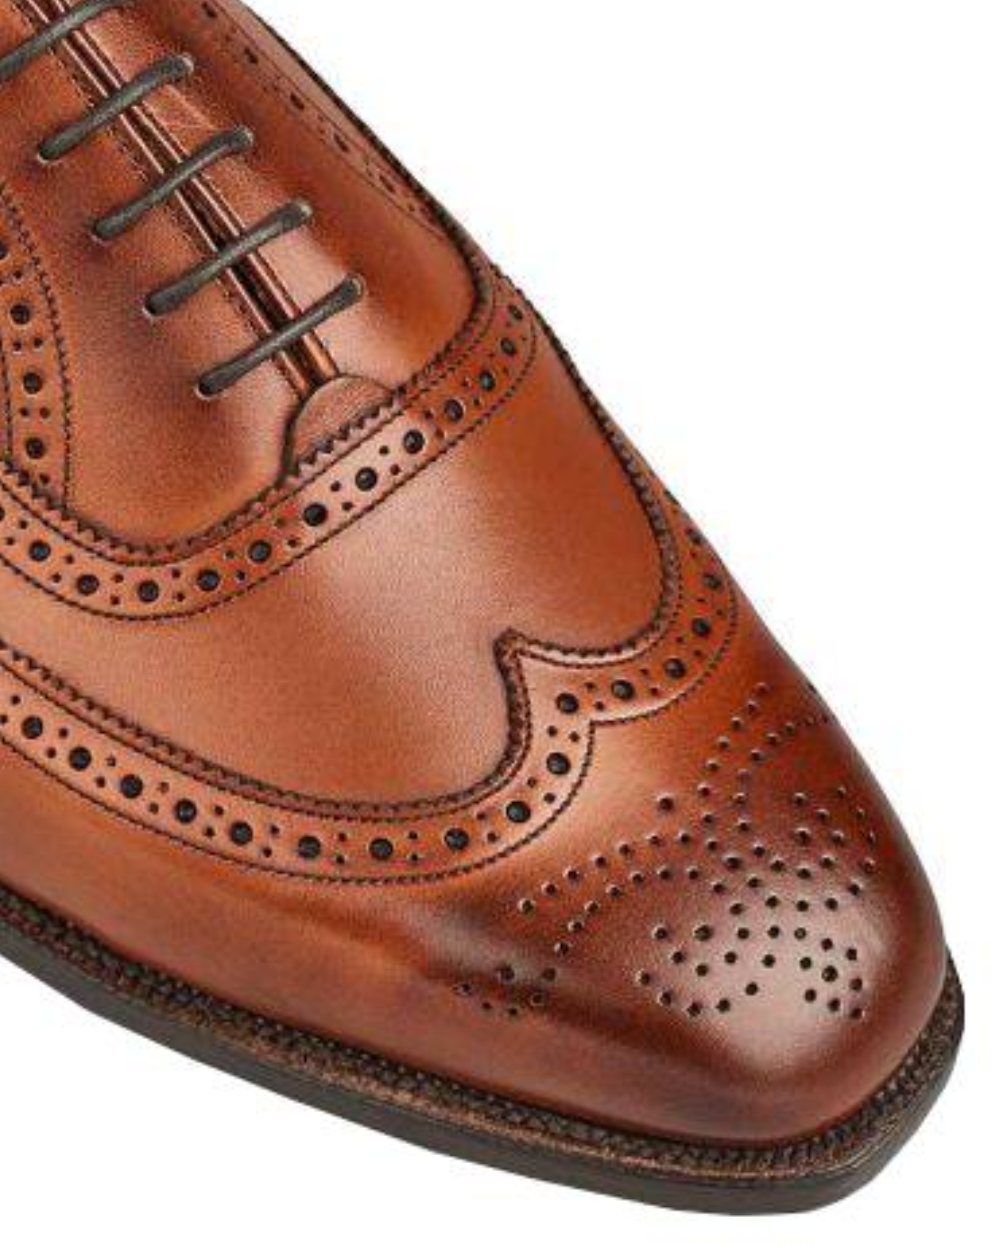 Beechnut Burnished Coloured Trickers Picadilly Leather Sole Brogue Oxford City Shoe On A White Background 